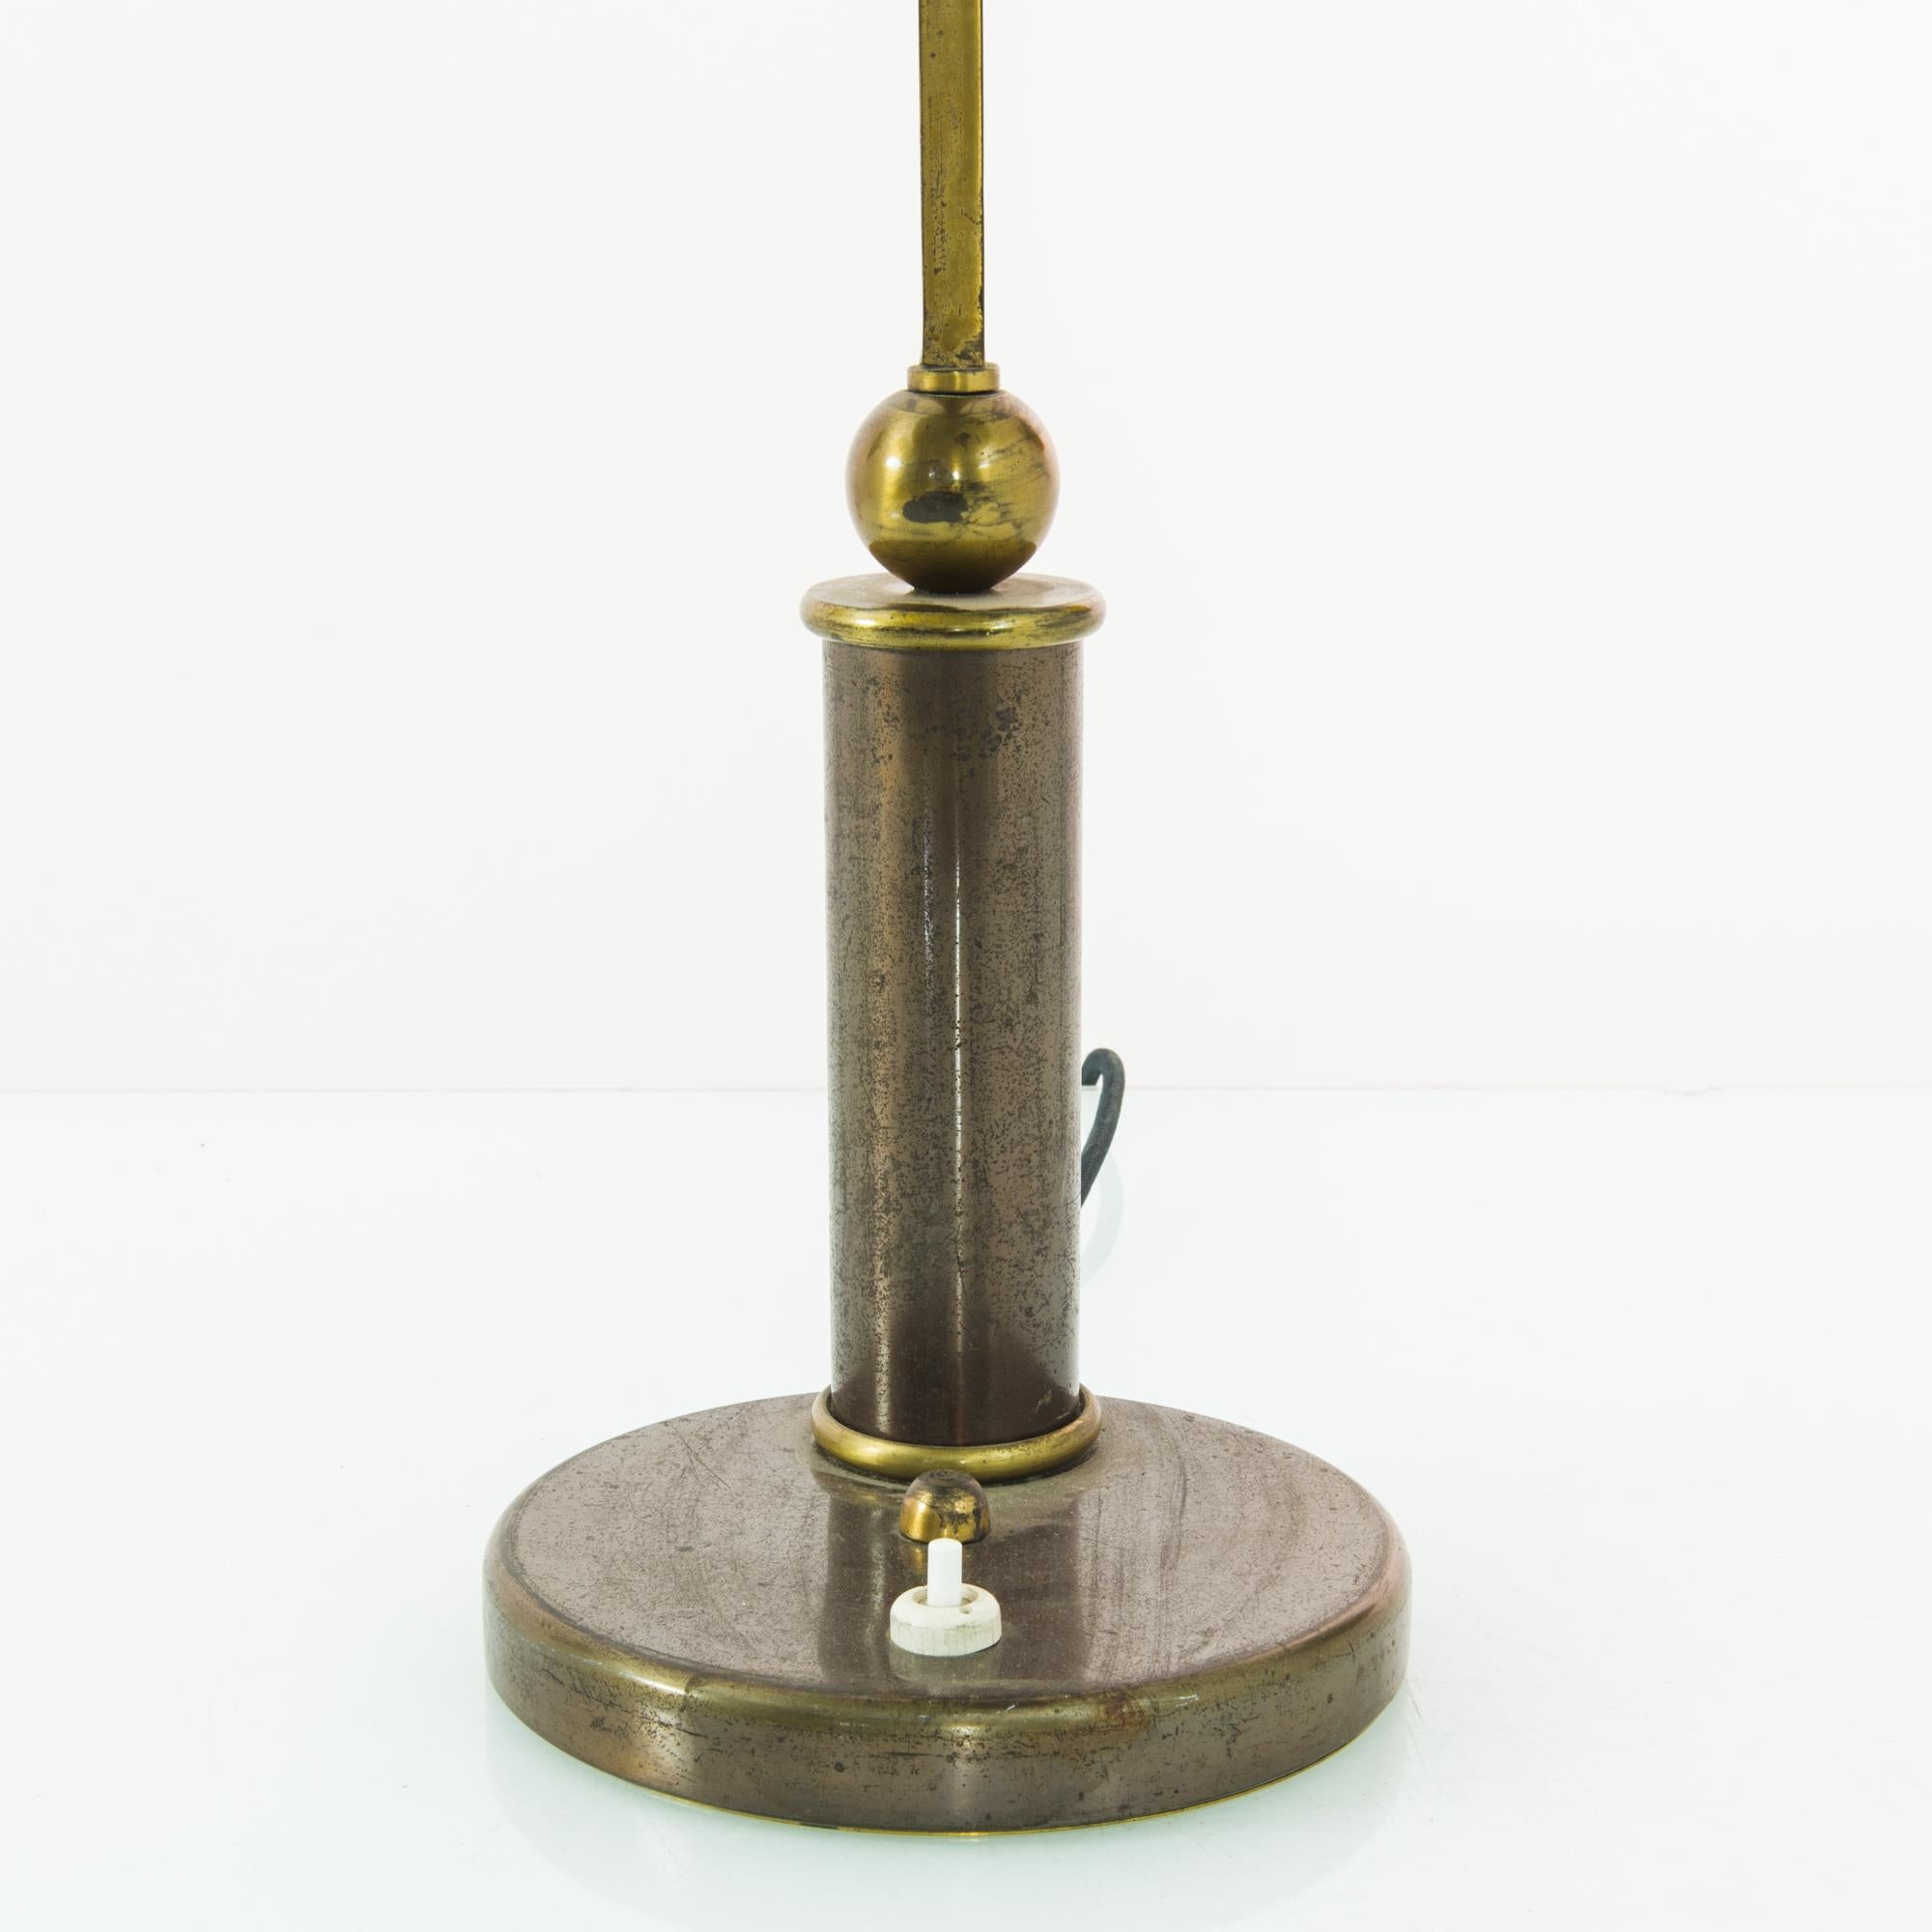 This metal table lamp was made in France, circa 1930. The generously sized dome lampshade, circular fixtures, and the globe balanced precisely on the cylindrical stand give it a geometric silhouette, hinting at an Art Deco influence. With its